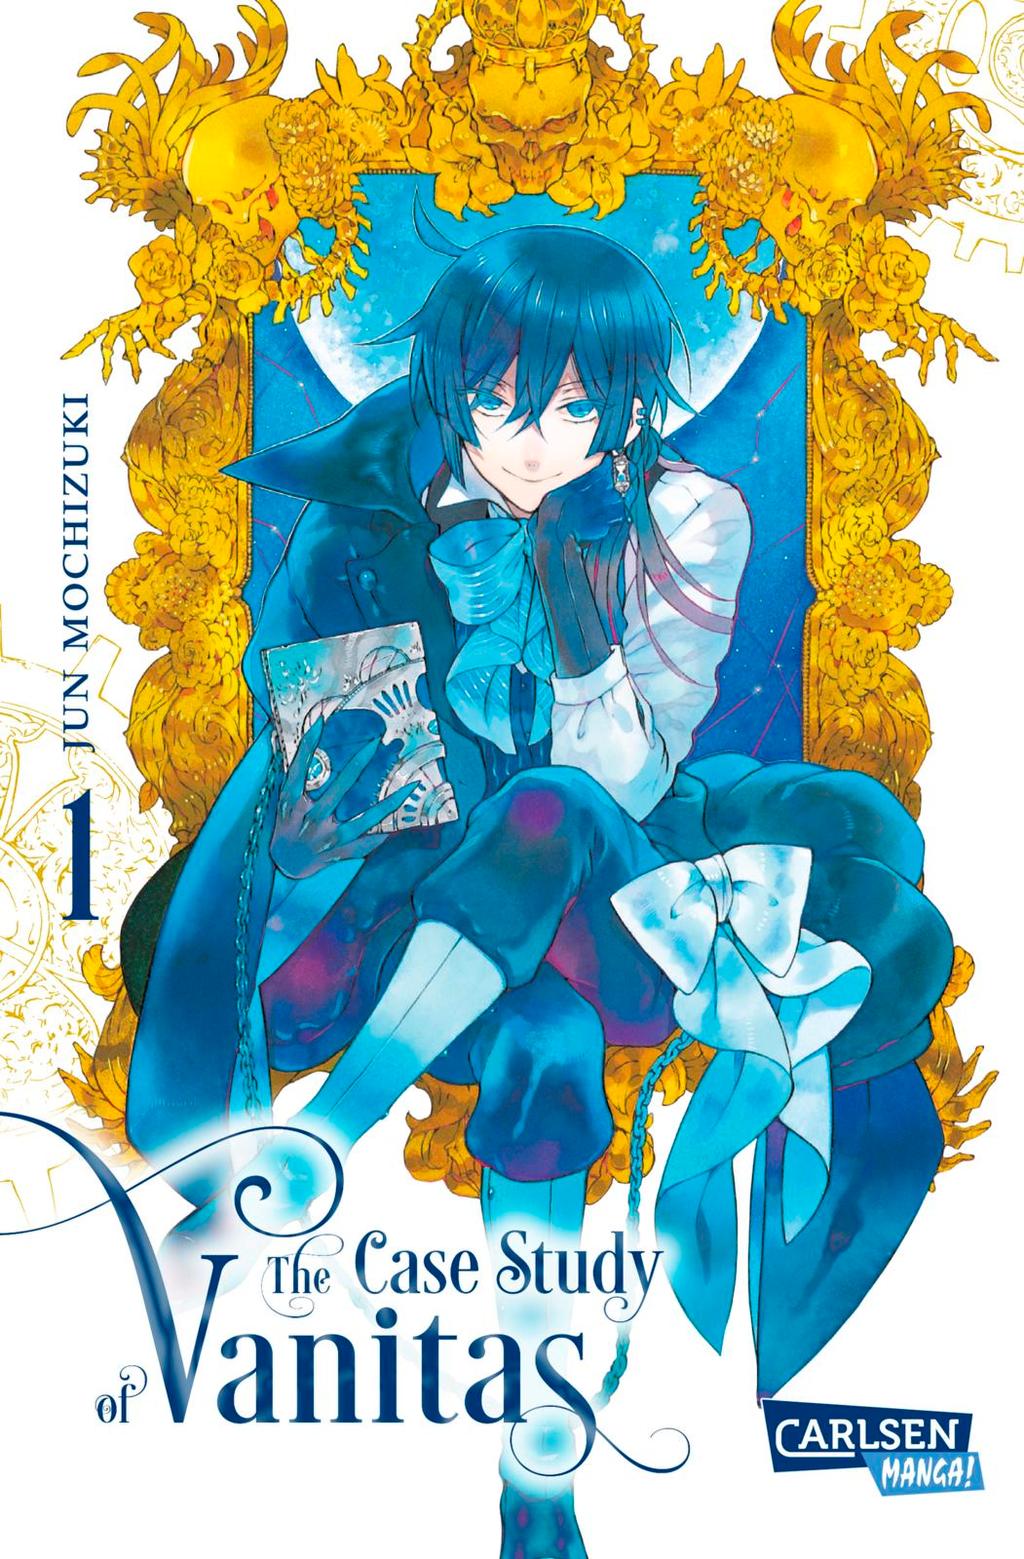 what chapter does case study of vanitas anime end